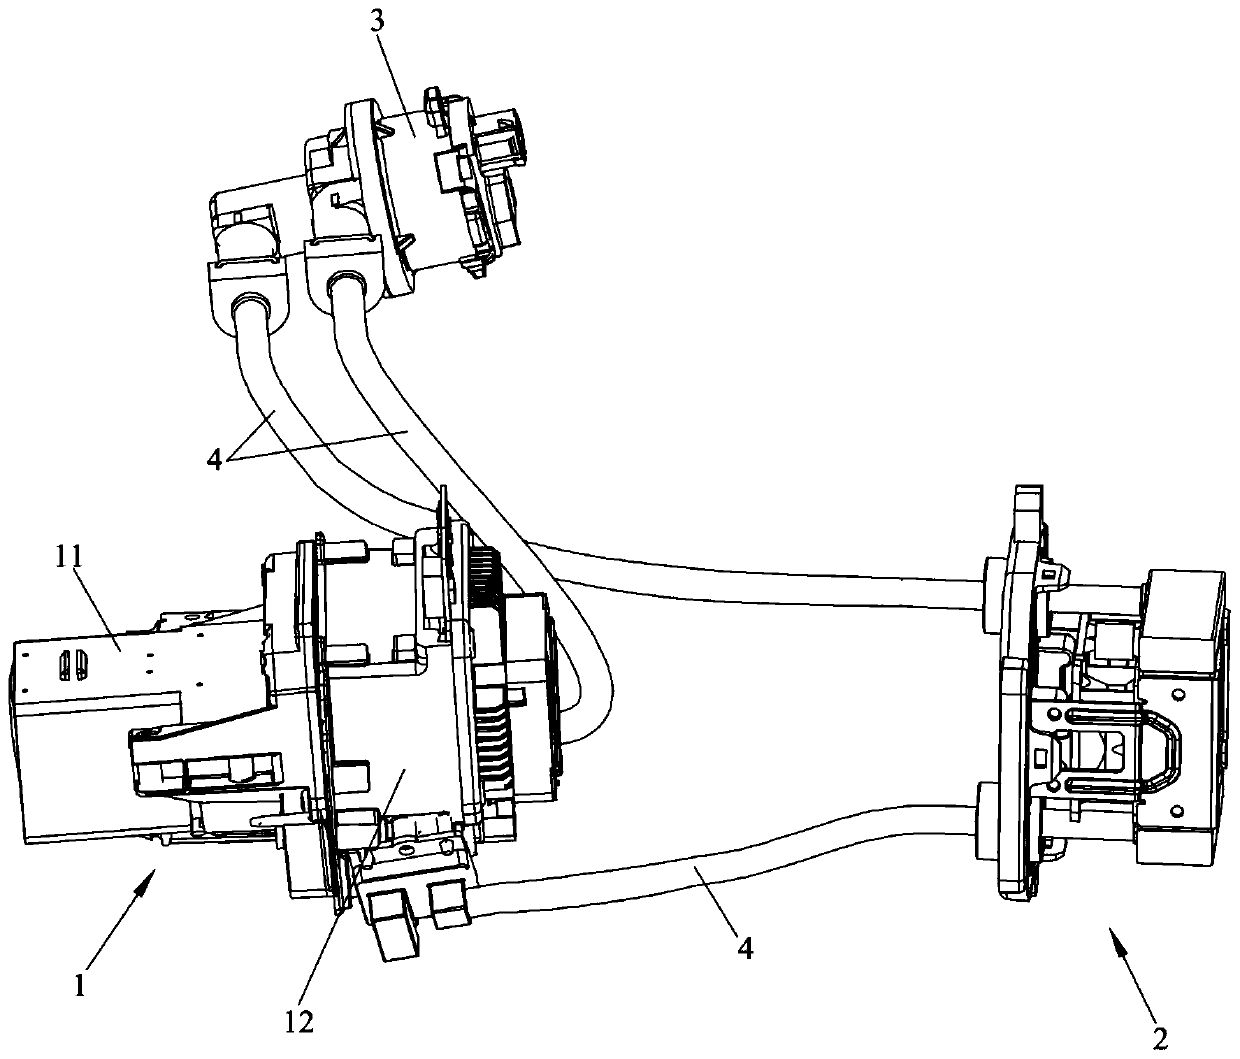 Water-cooled vehicle lamp and vehicle